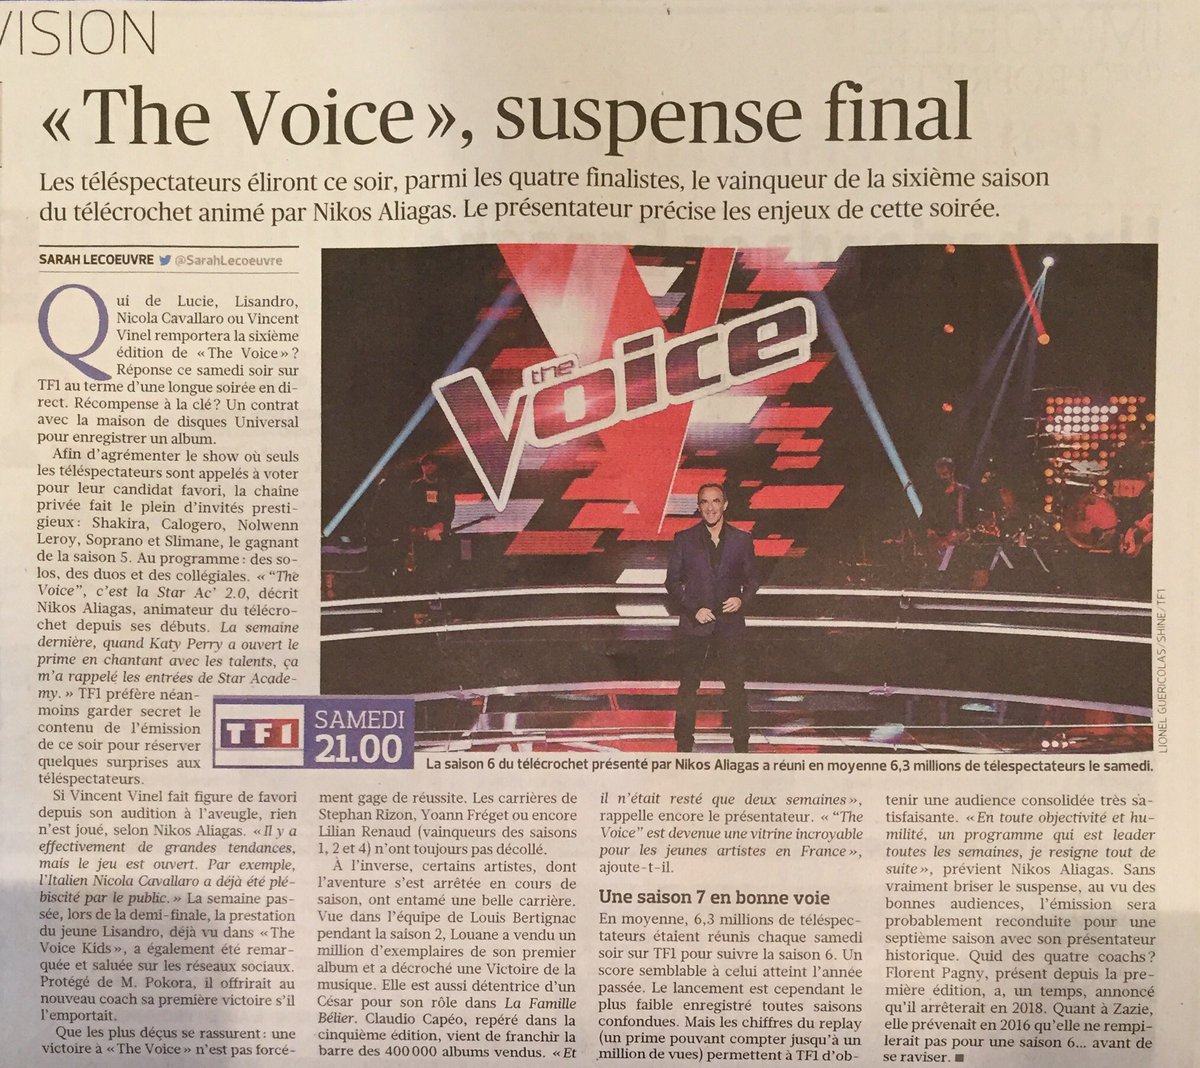 The Voice 2017 - Presse - Page 3 DB8Q0WFW0AIIk8k